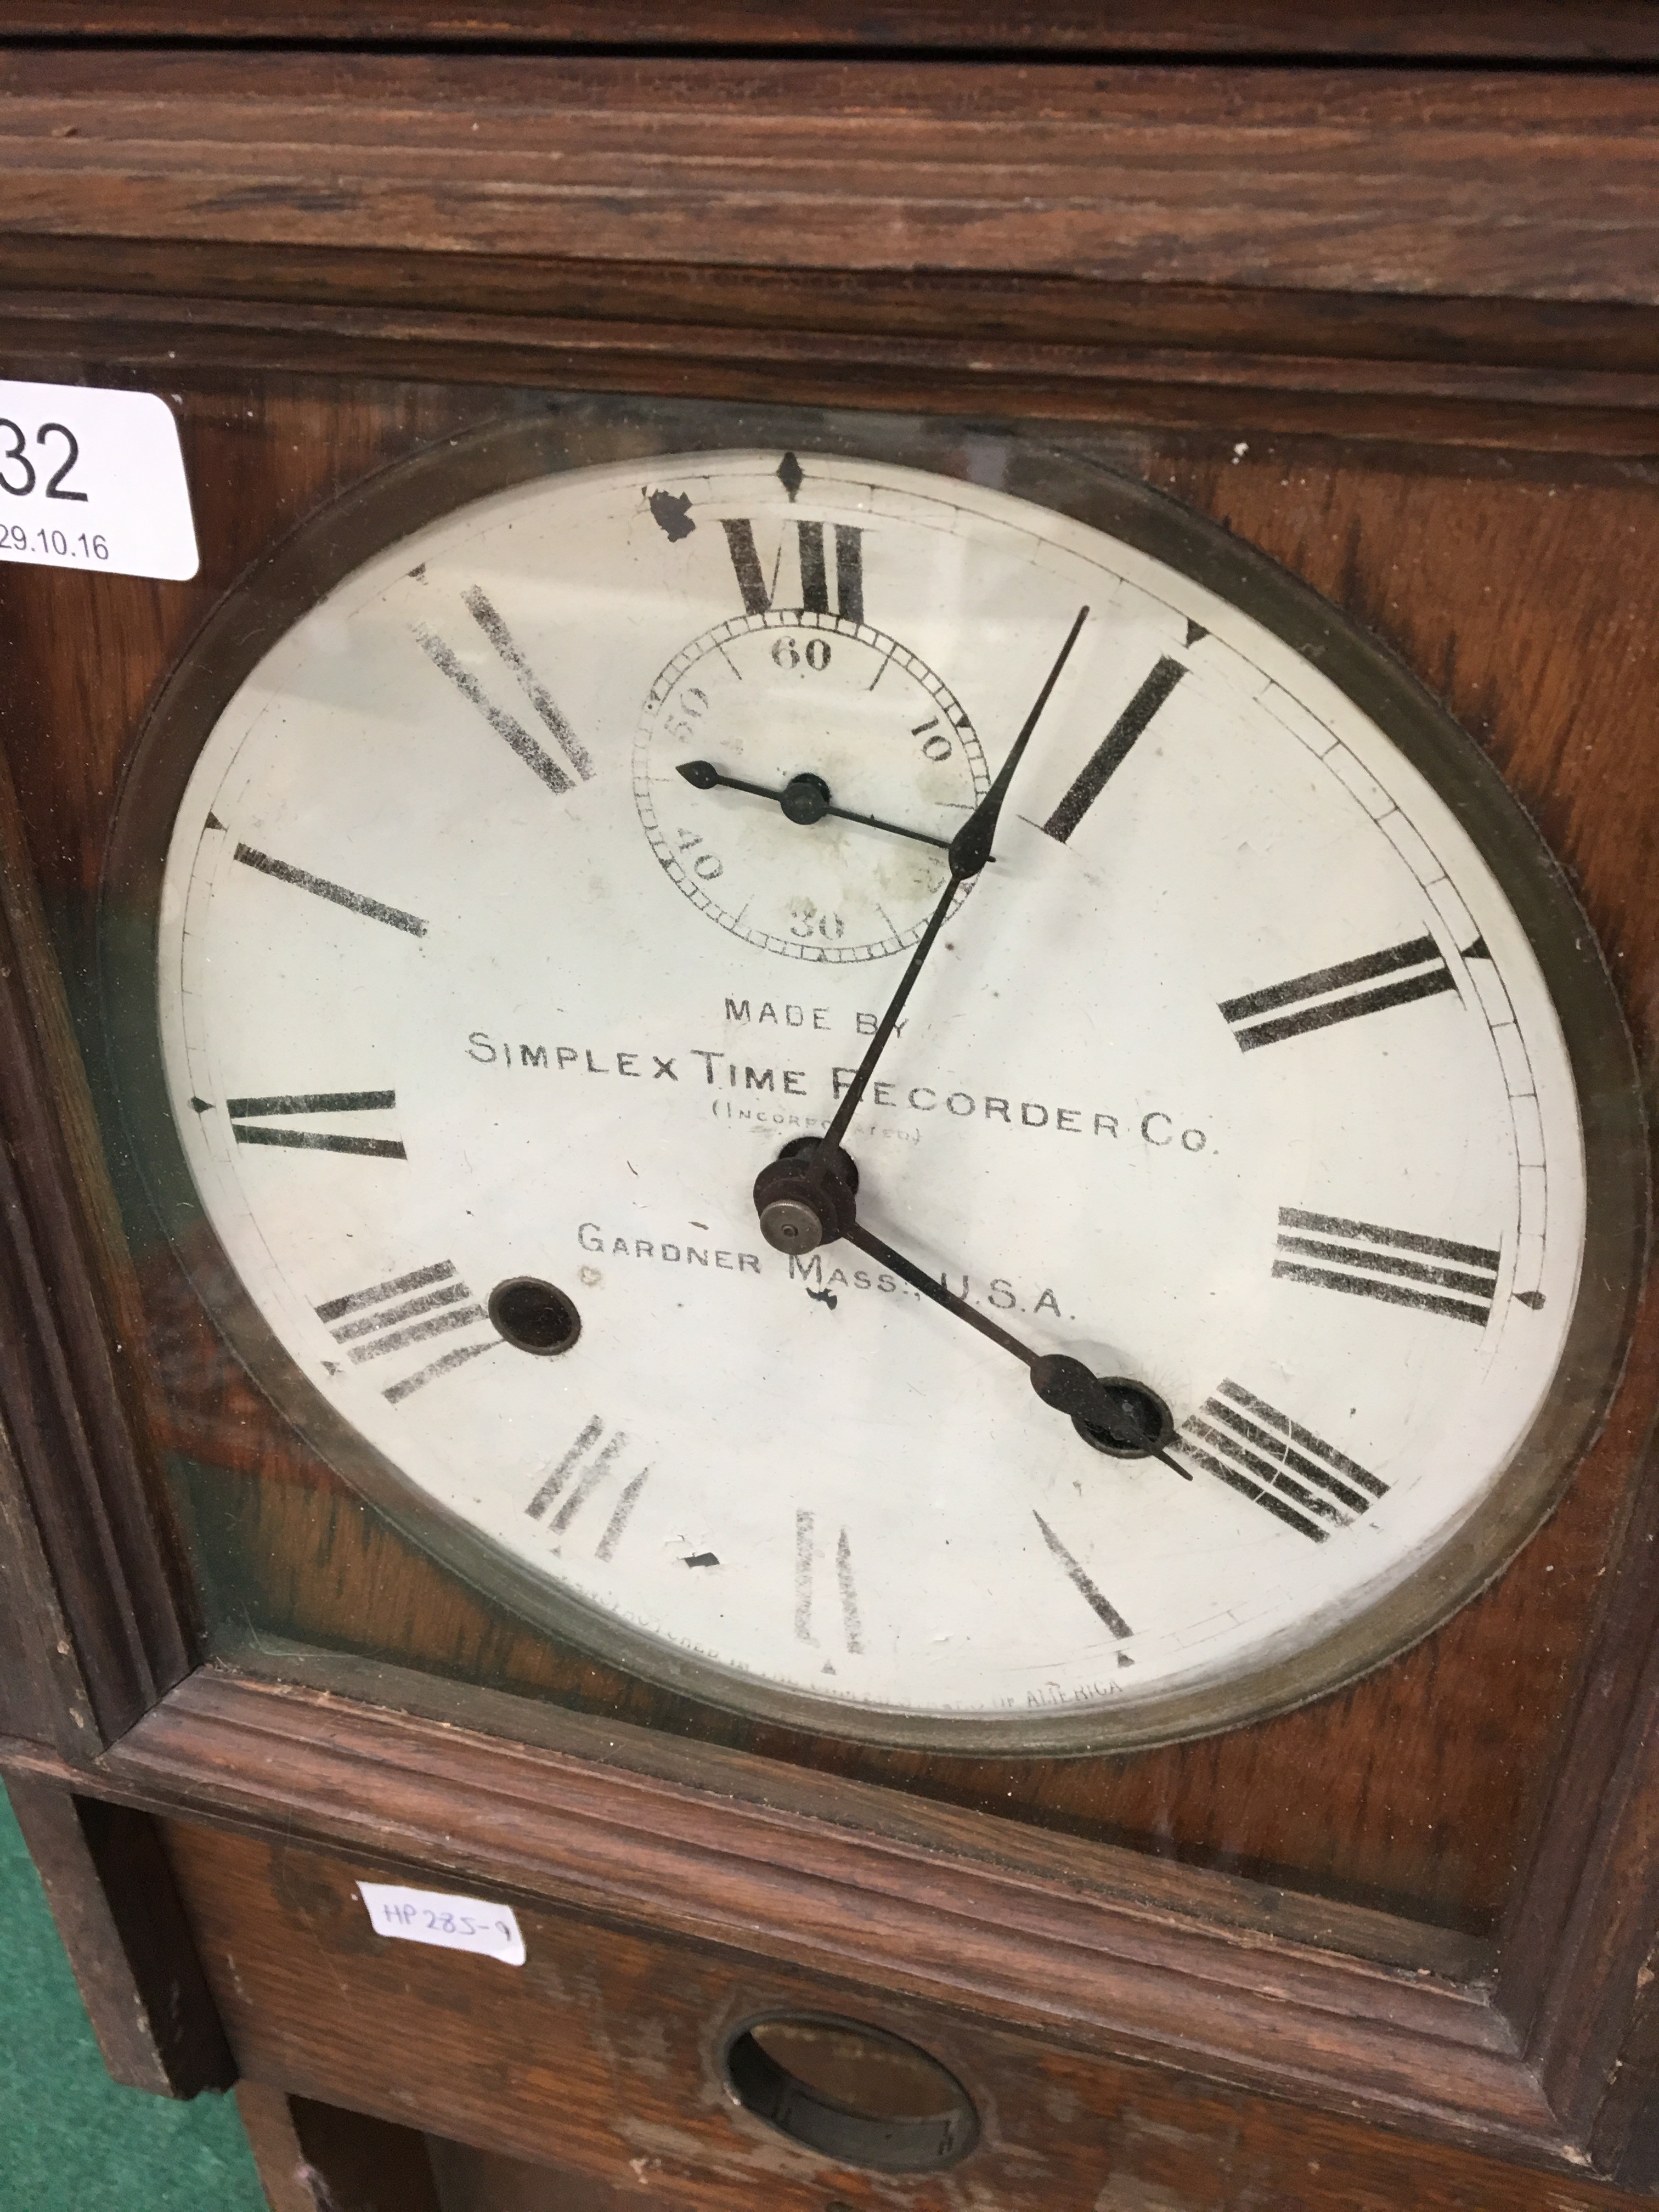 Early 20th century oak cased wall clock by Simplex Time Recorder Co, Gardener Mass, USA. - Image 2 of 2